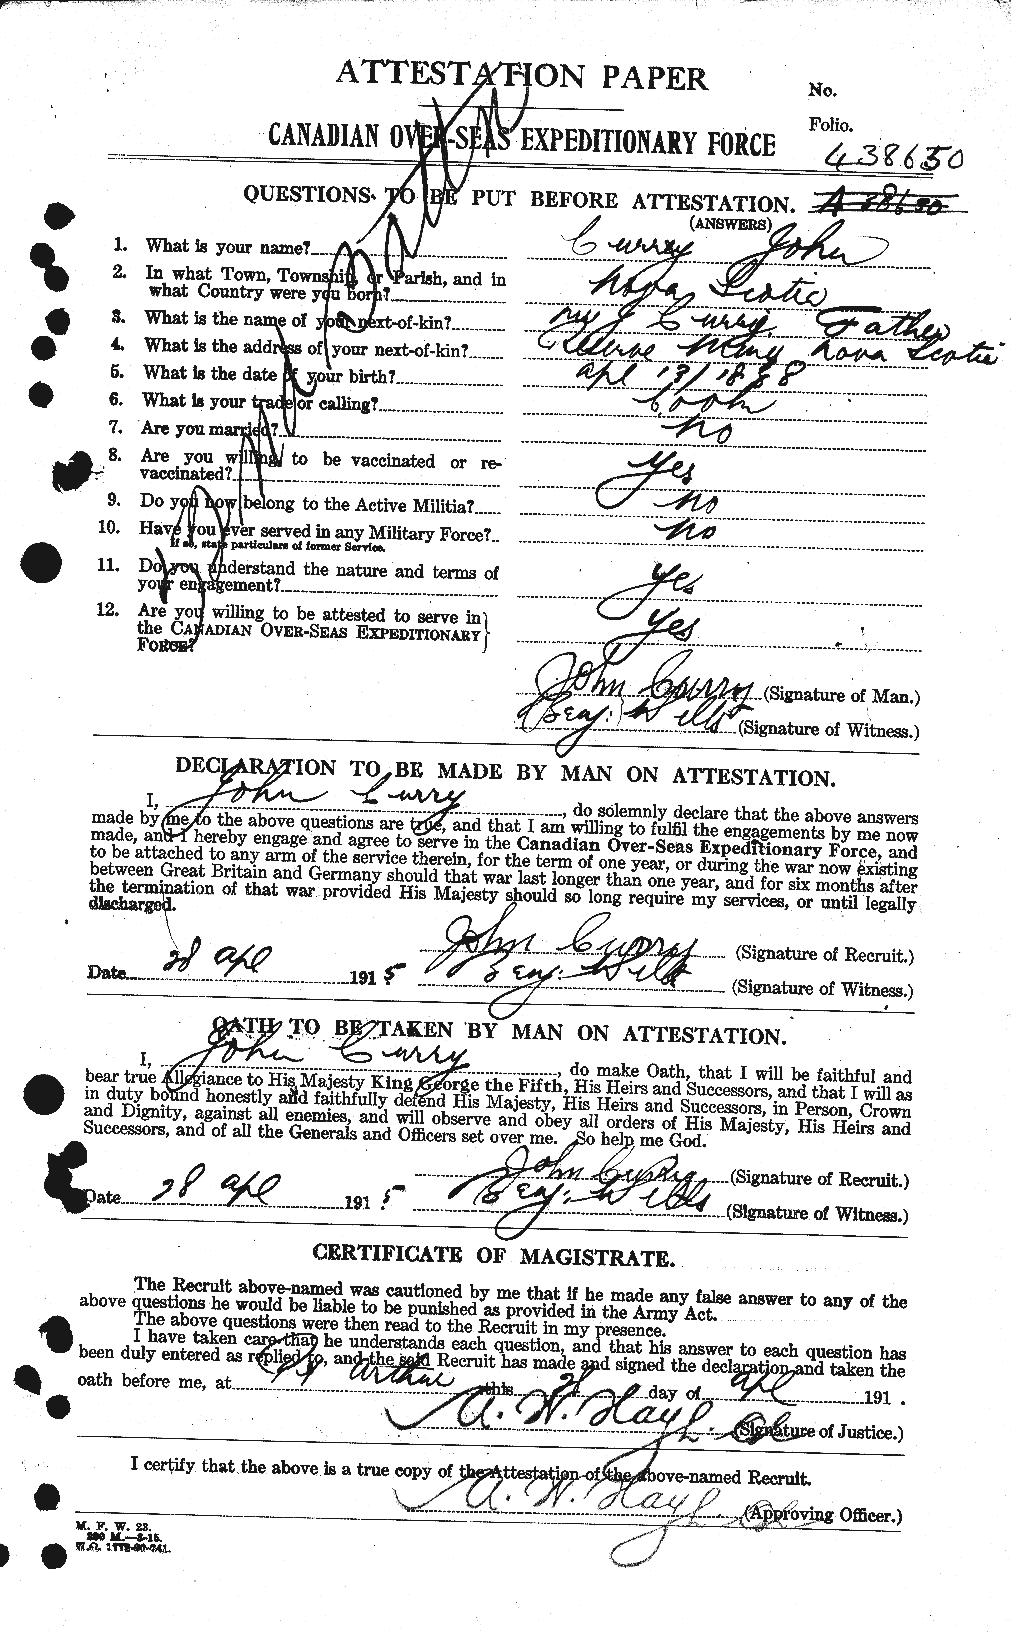 Personnel Records of the First World War - CEF 070997a